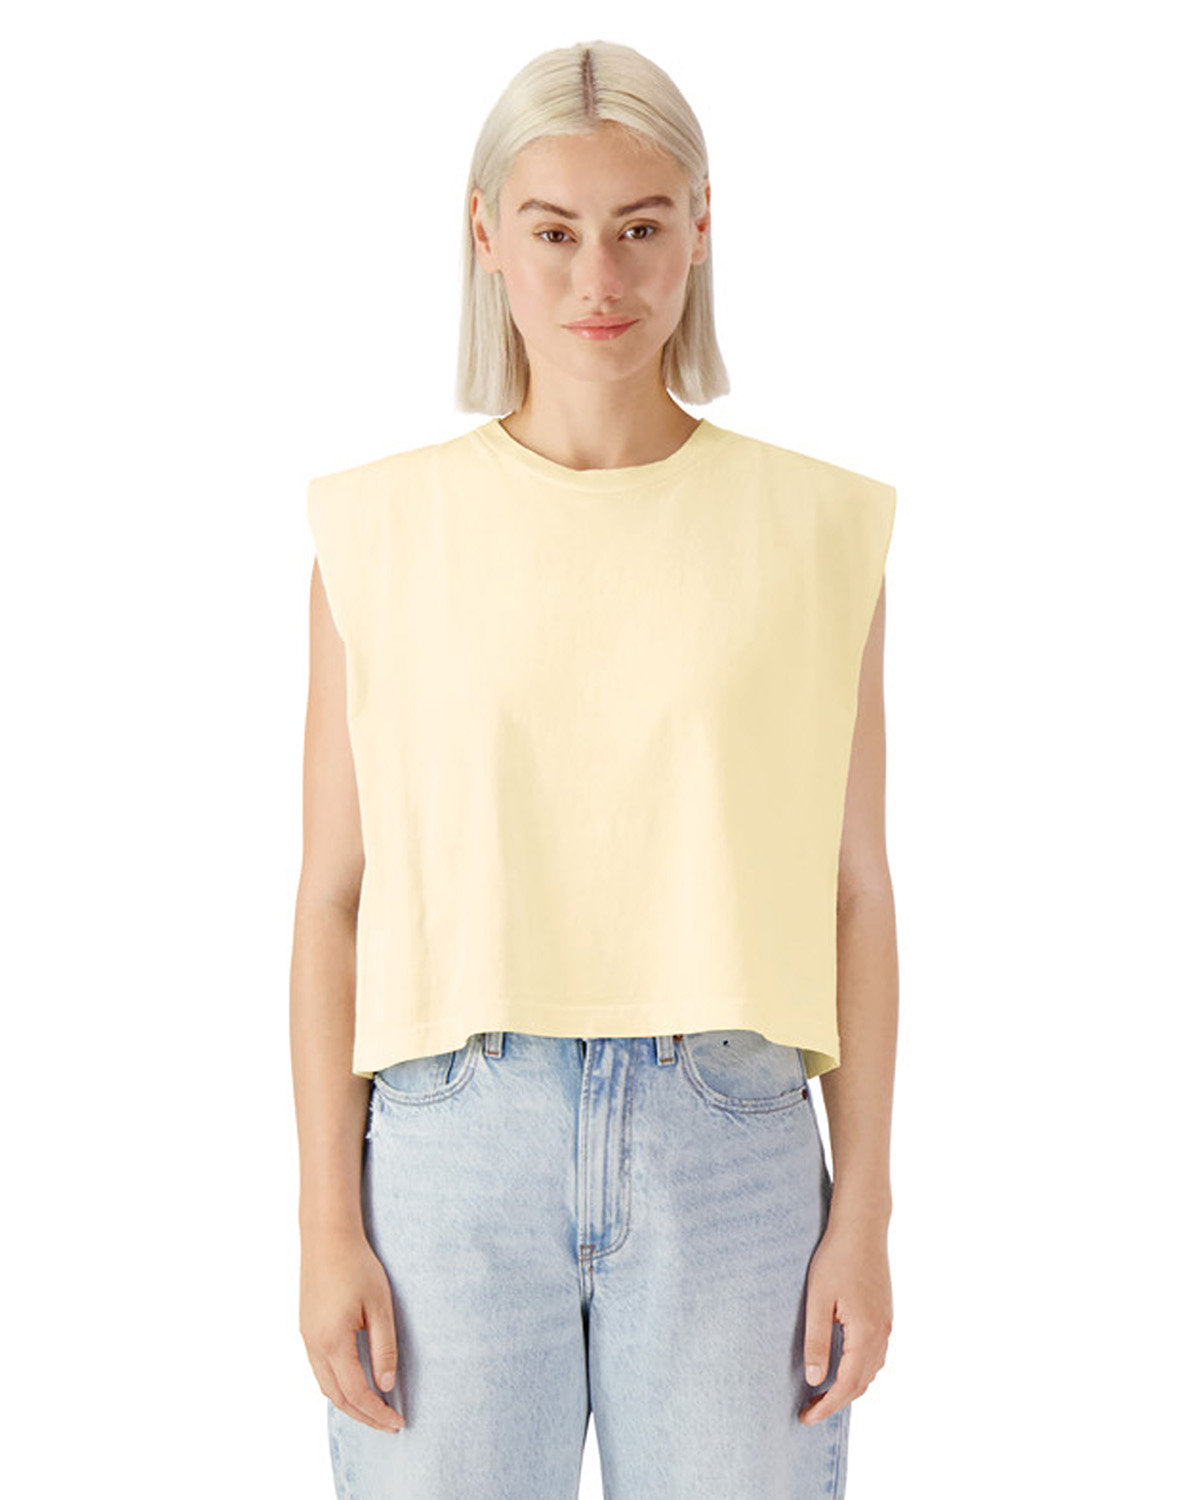 American Apparel: Embrace Bold Style and Comfort with the Heavyweight Cotton Women's Garment Dyed Muscle